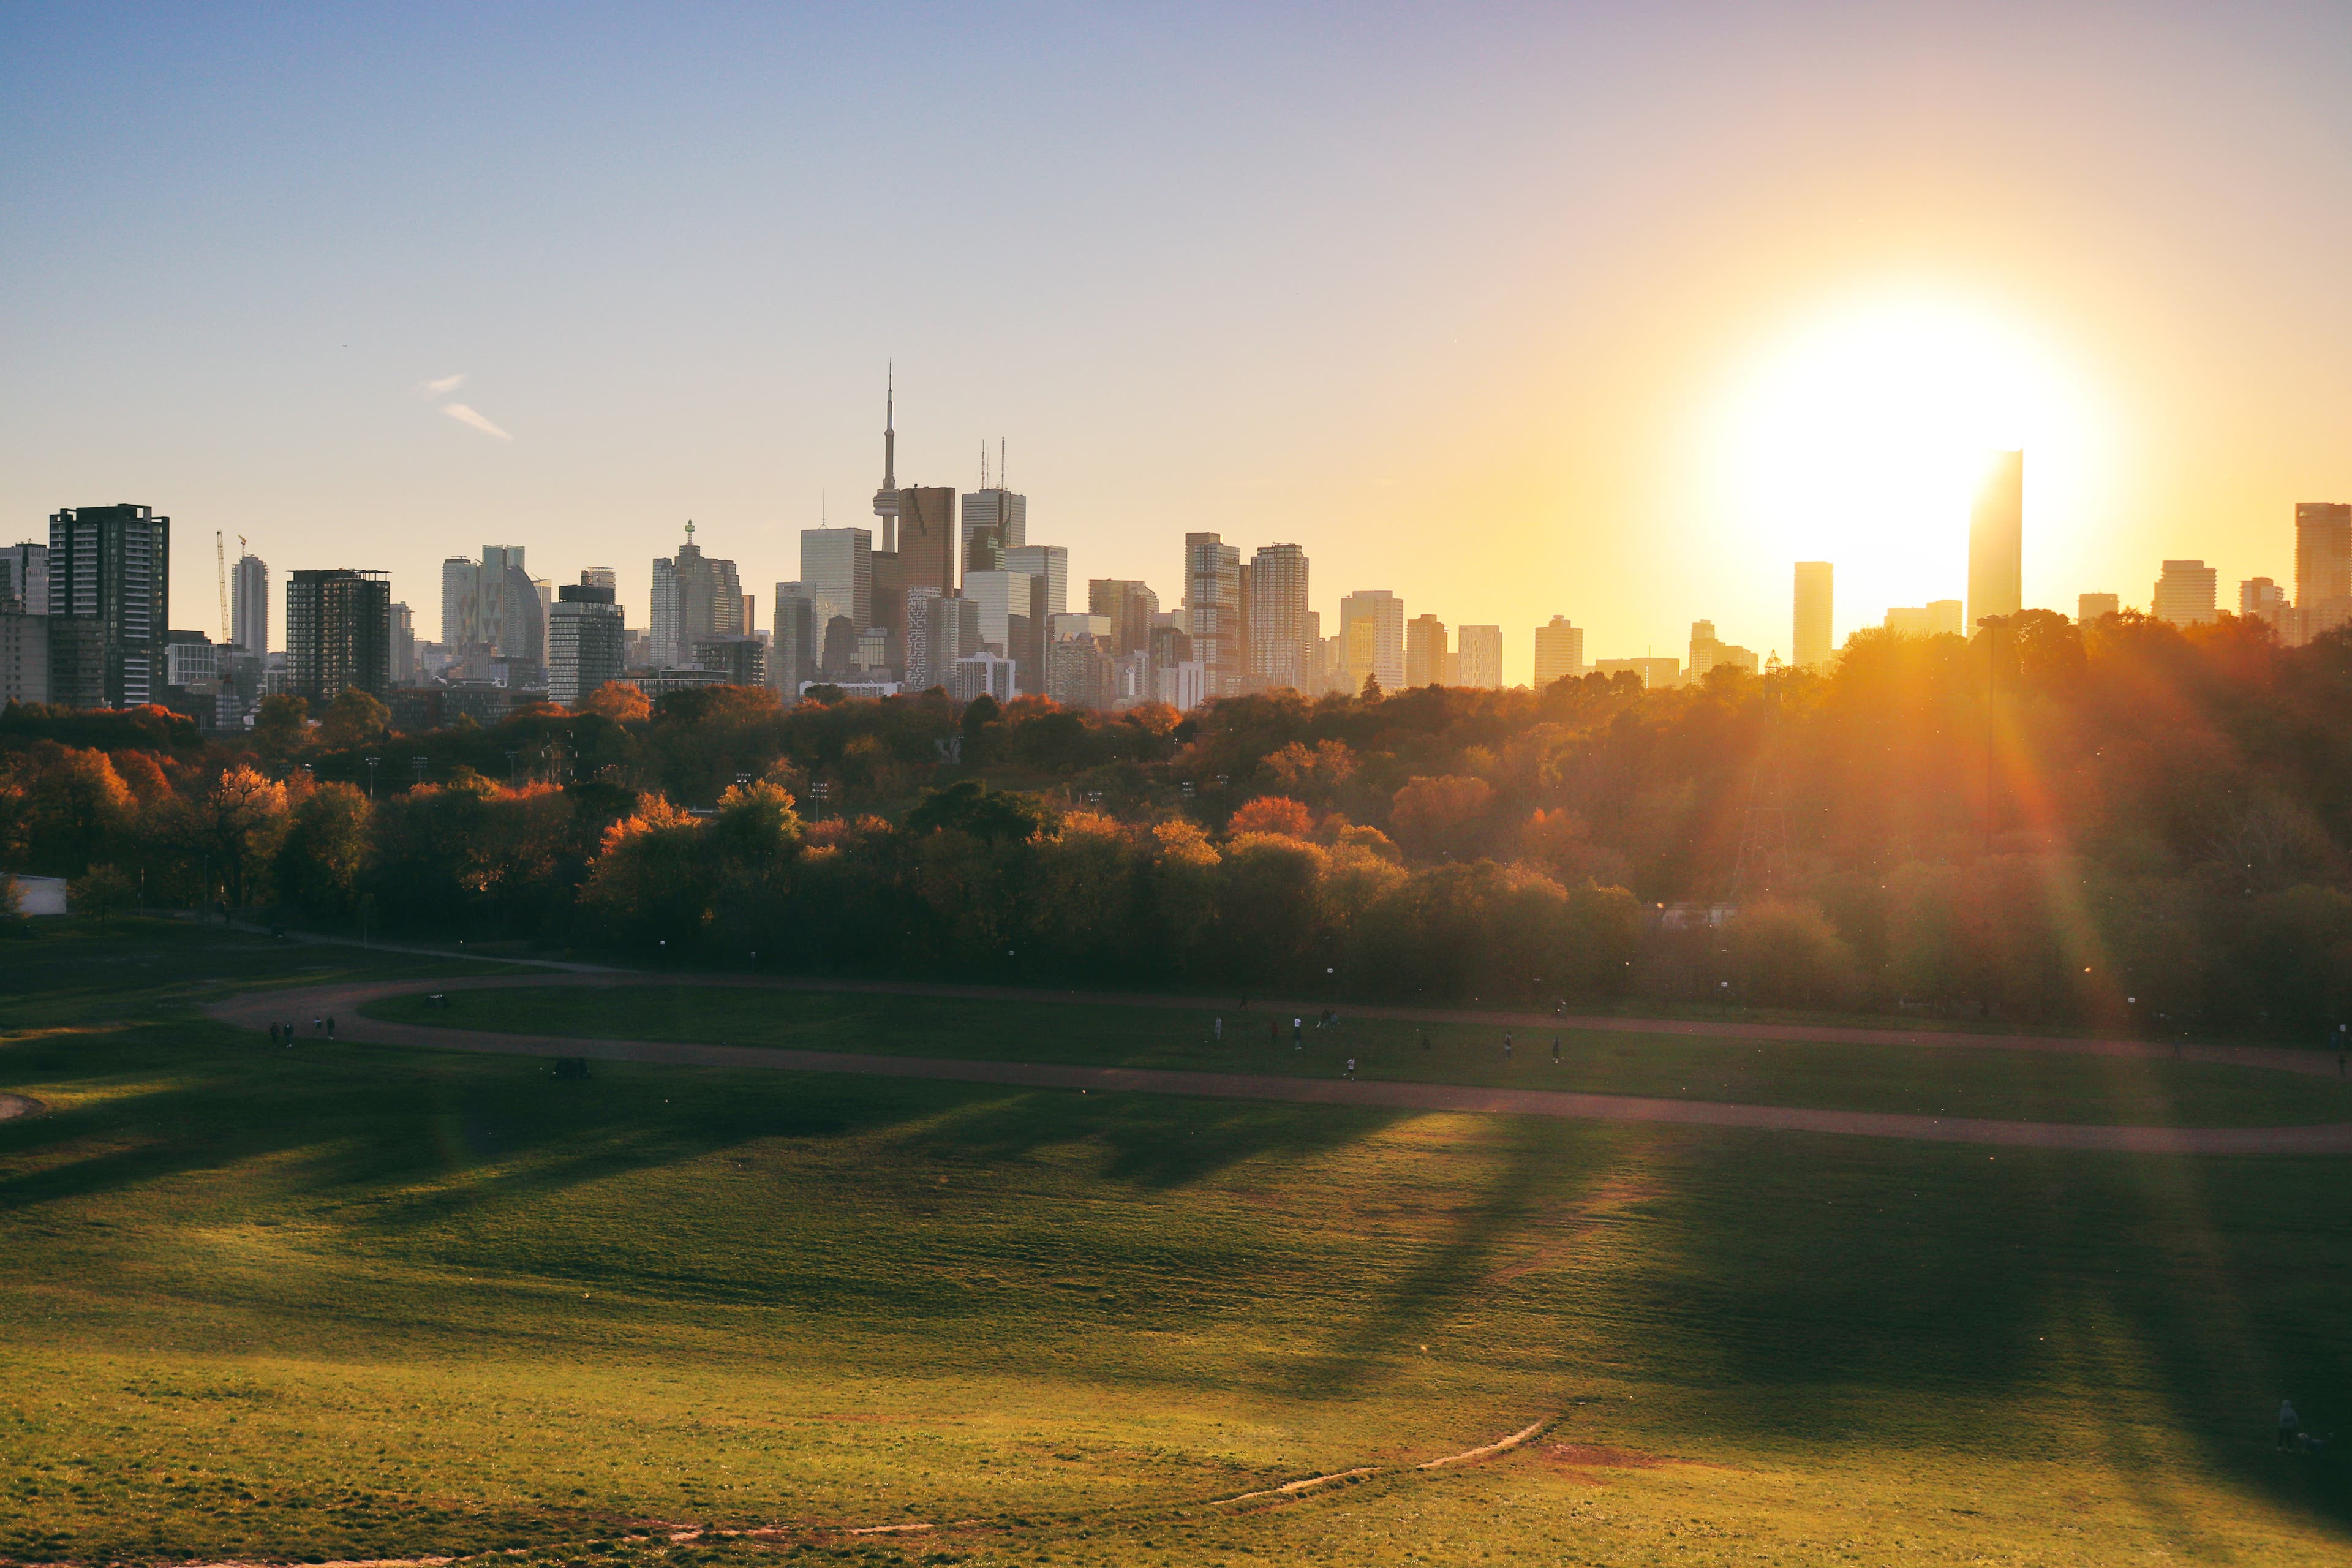 Gorgeous sunset in Toronto on a lovely day in November. The characteristic Toronto skyline with the famous CN tower grace the horizon. As seen from Riverdale Park East, Broadview.